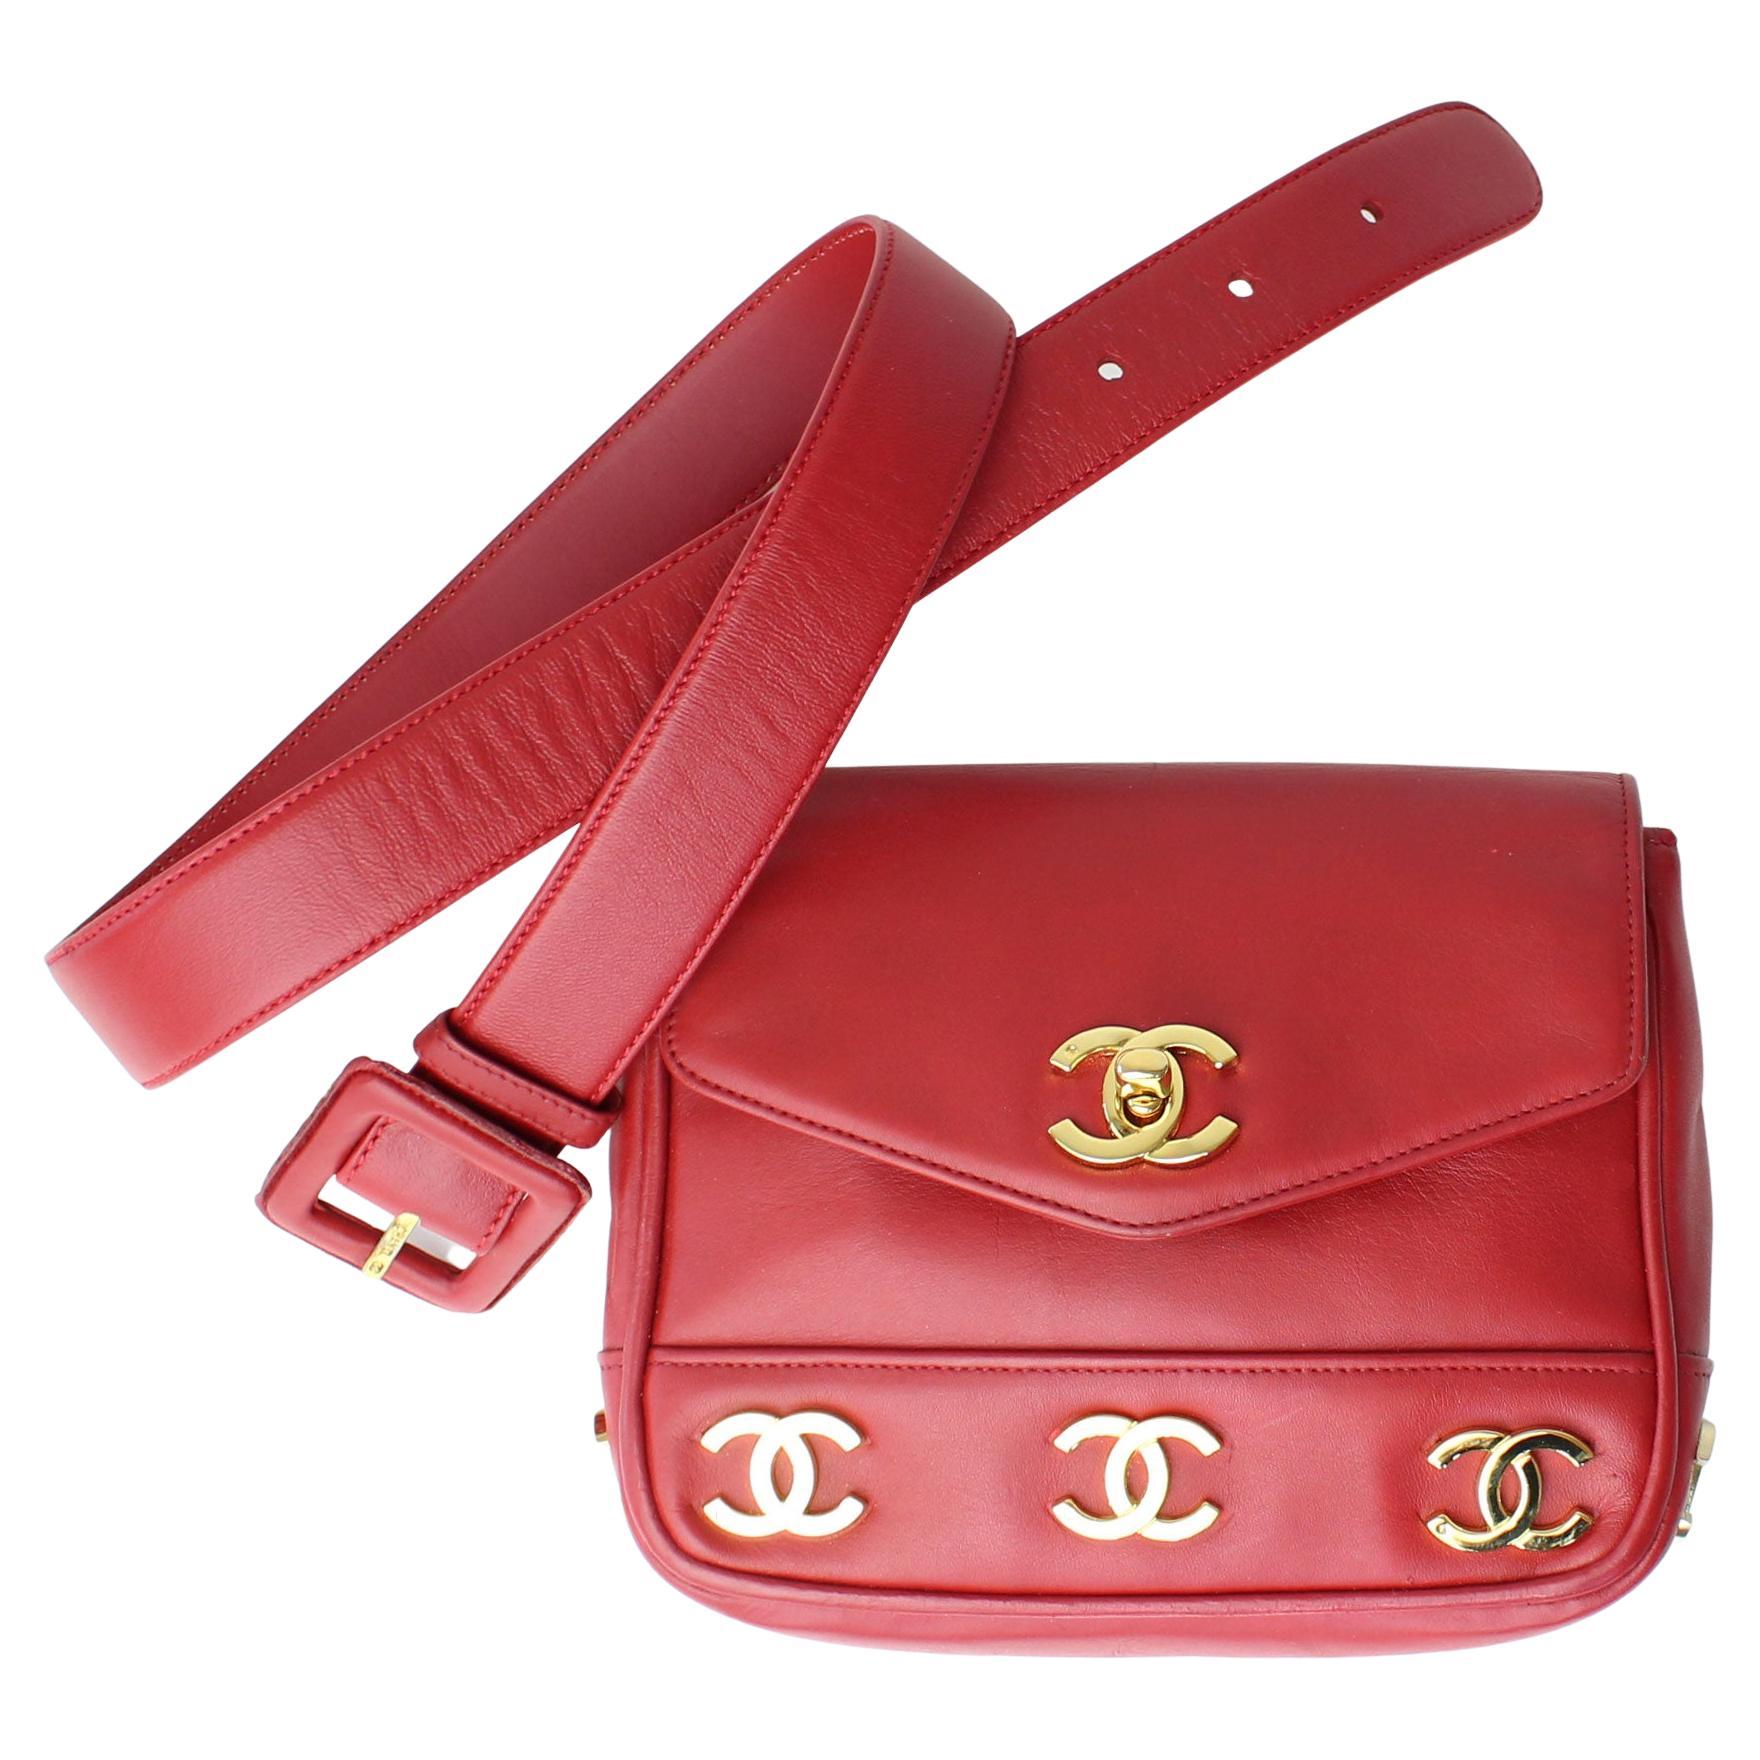 15 Best Chanel Wallets That Are Oh So Chic